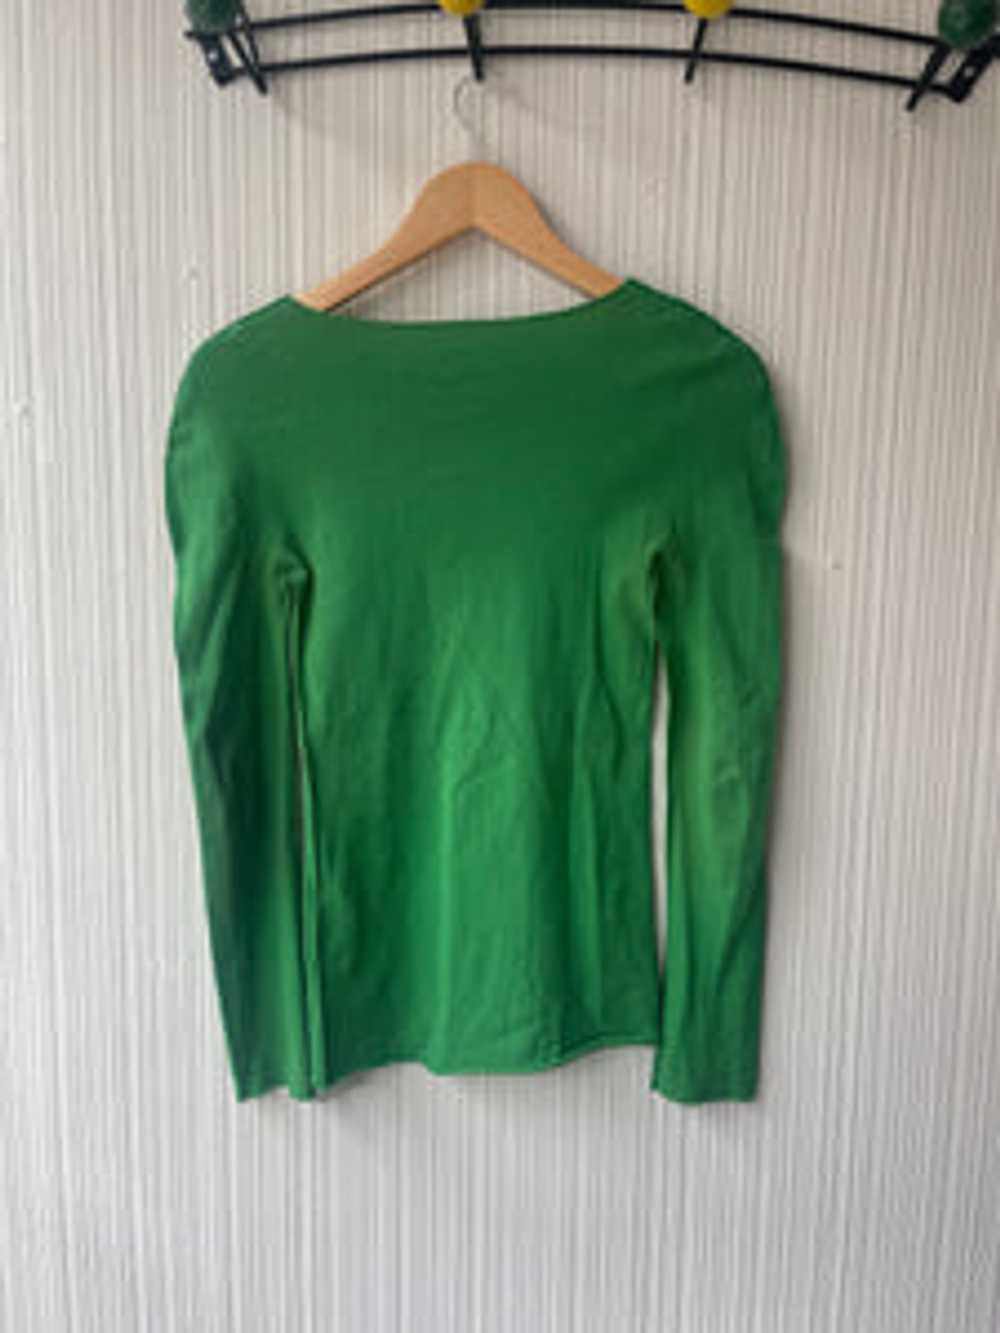 Issey Miyake APOC green woven net neck top - image 1